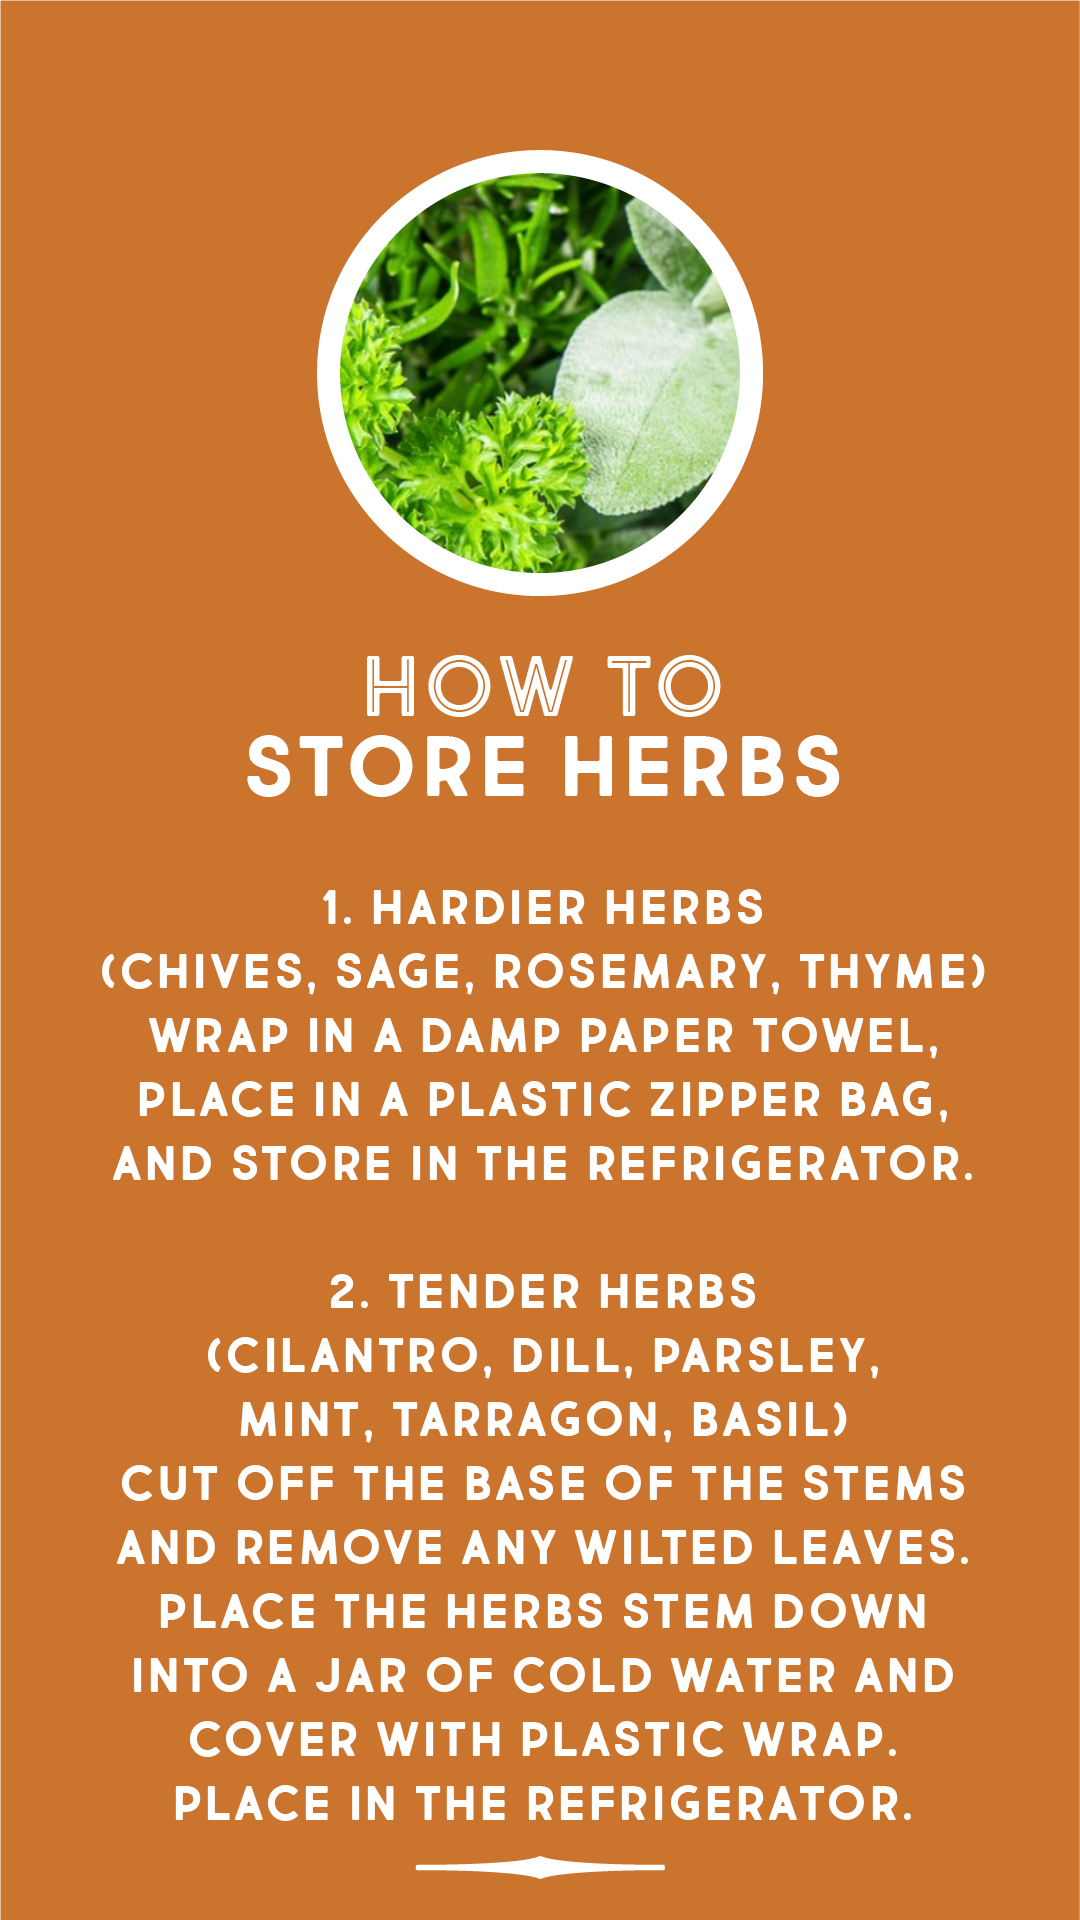 How to store herbs